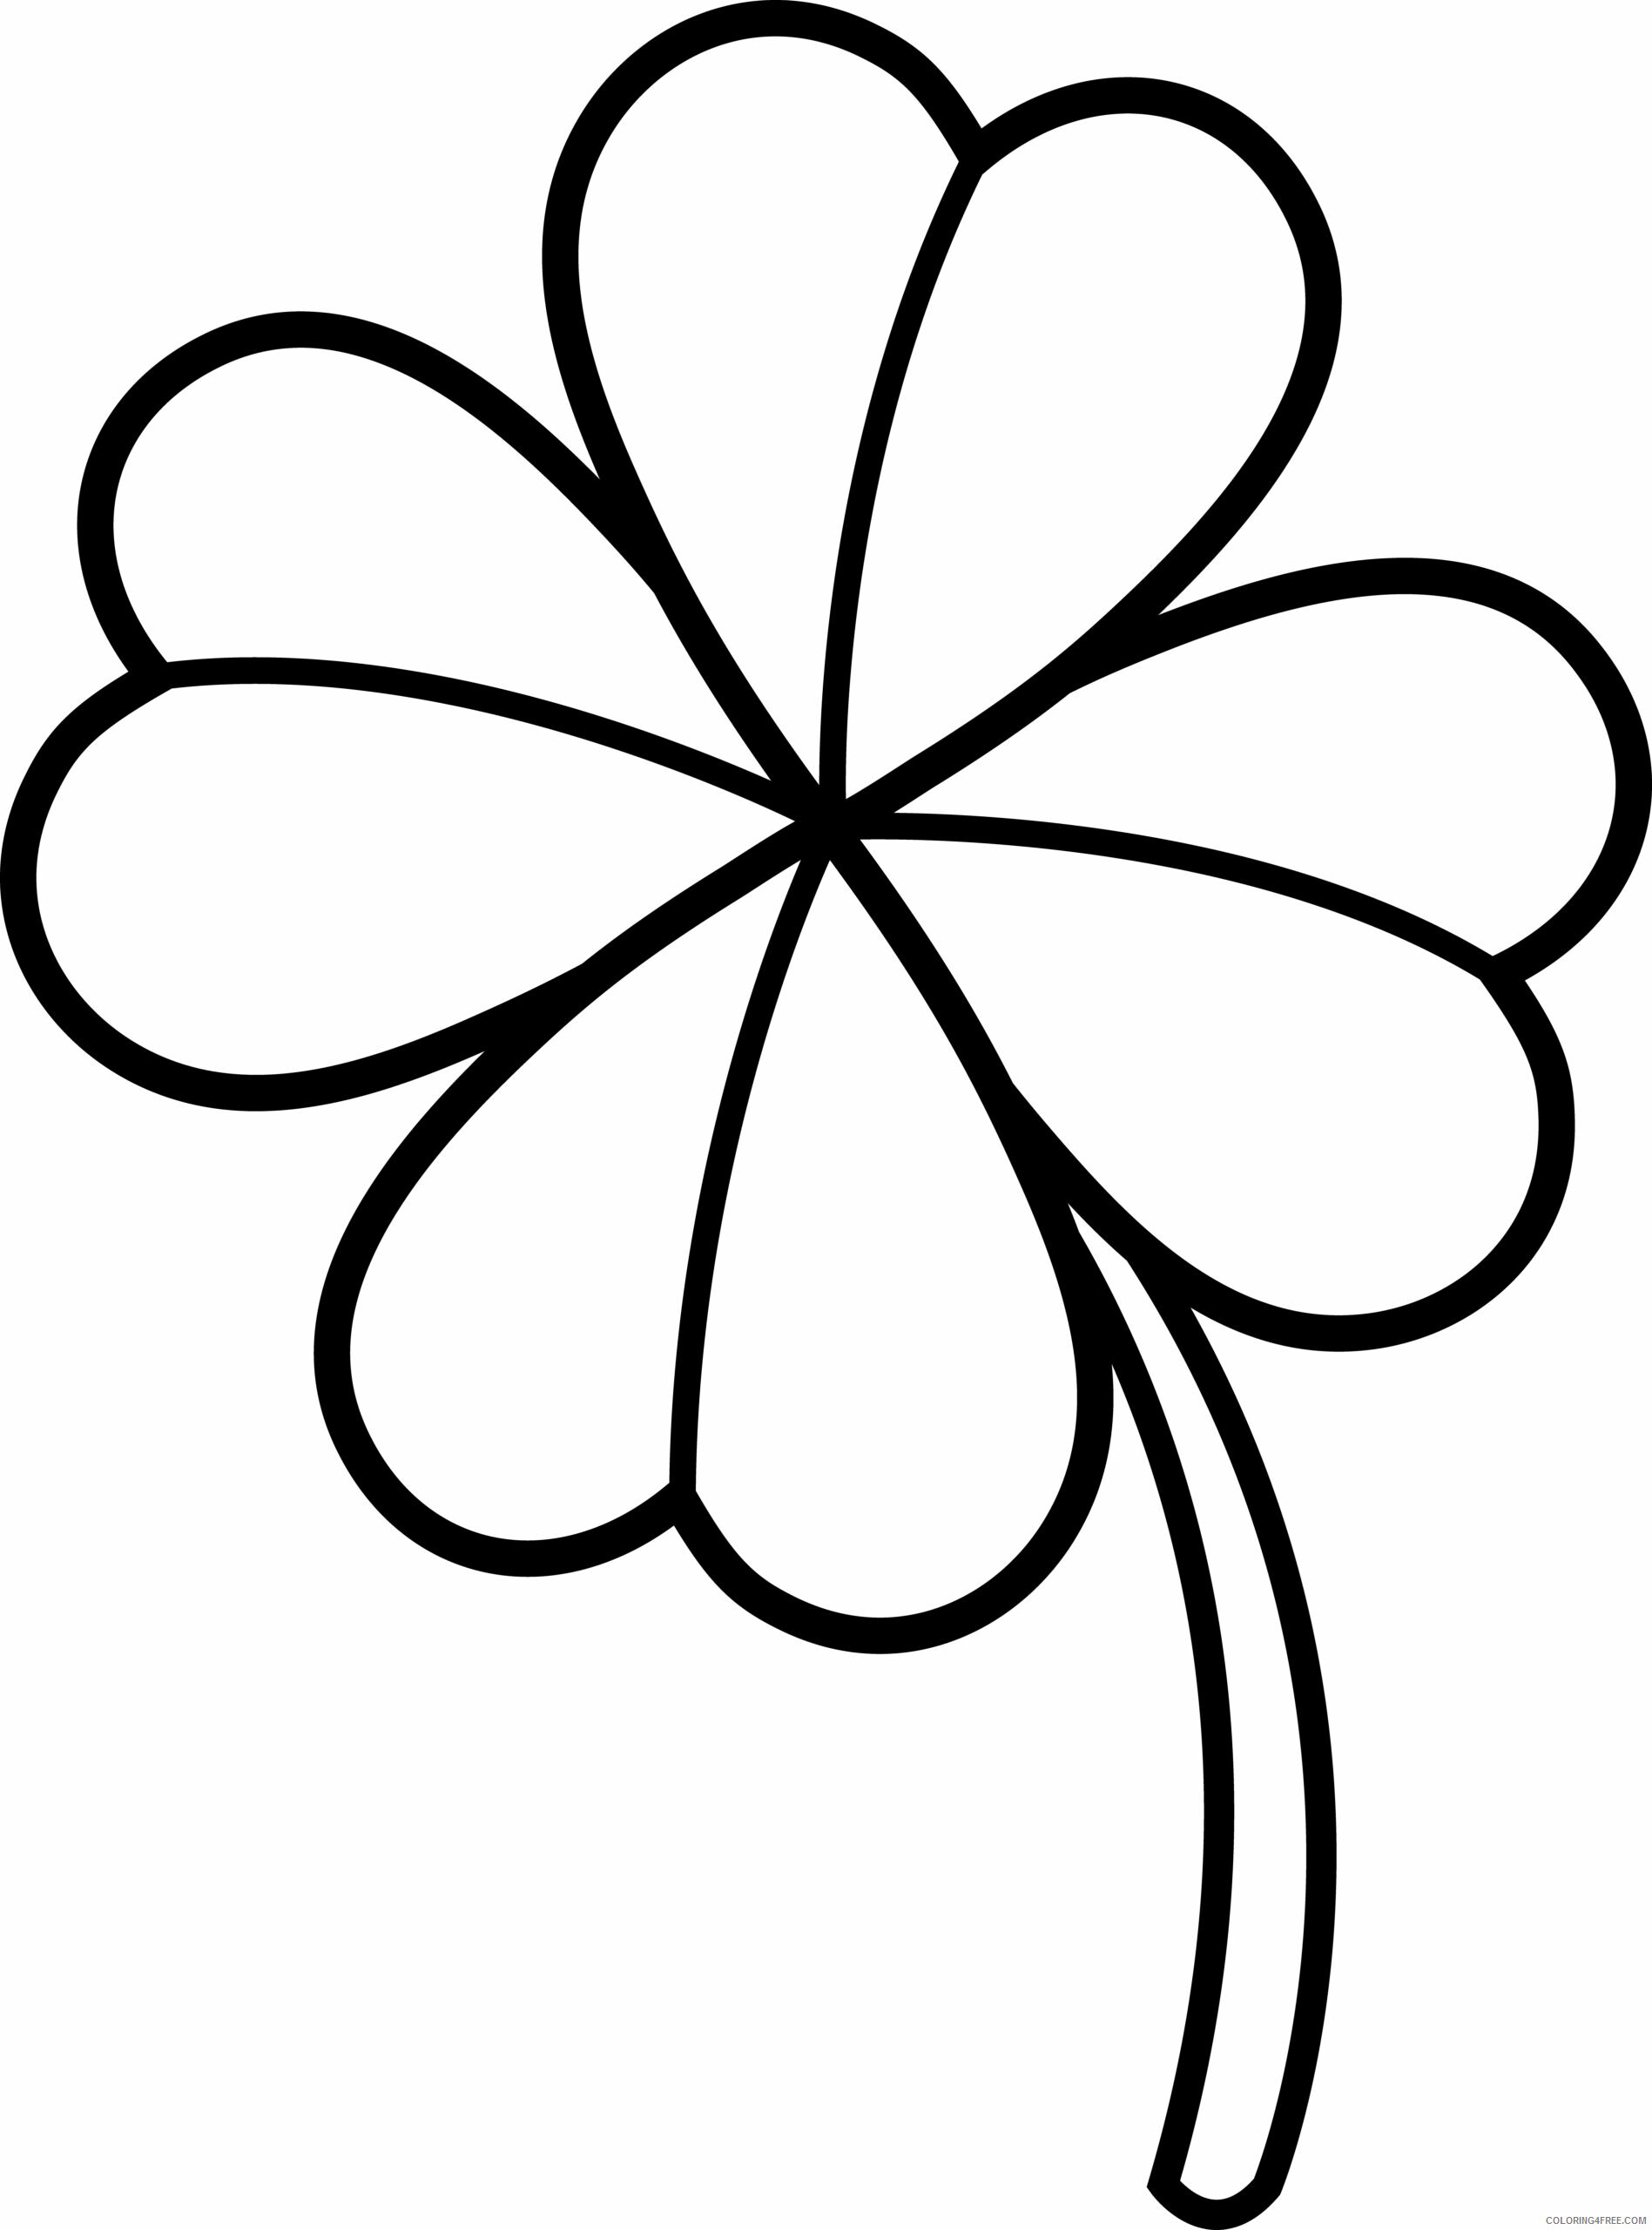 Clover Coloring Pages Easy Four Leaf Clover Printable 2021 1744 Coloring4free